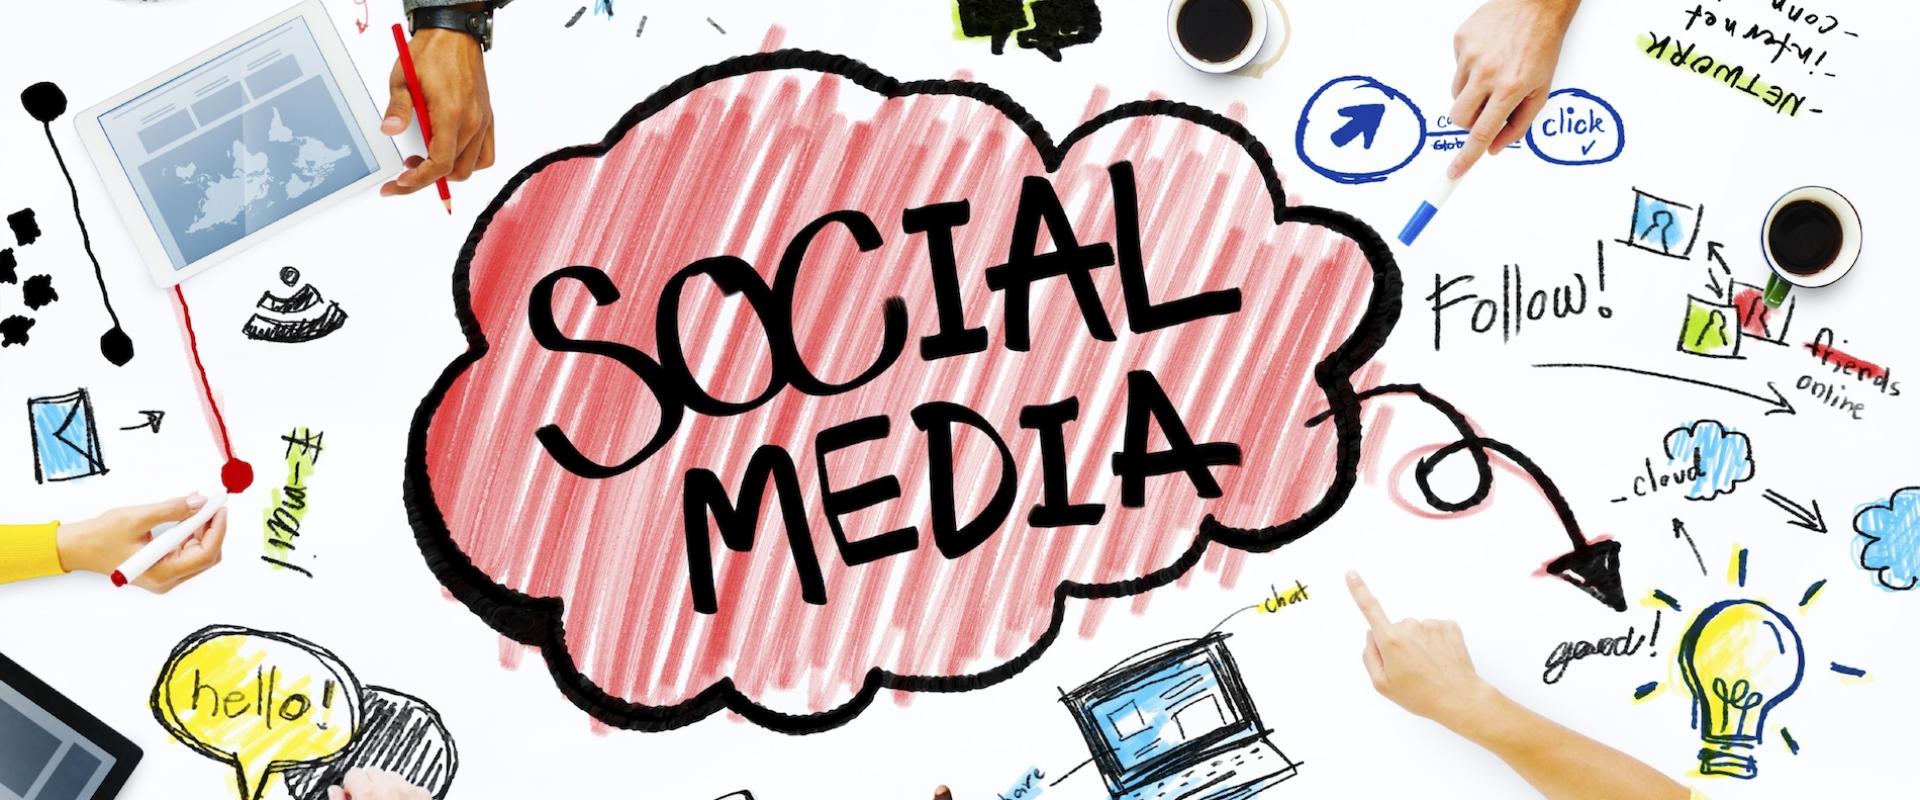 How to use social media effectively for your business